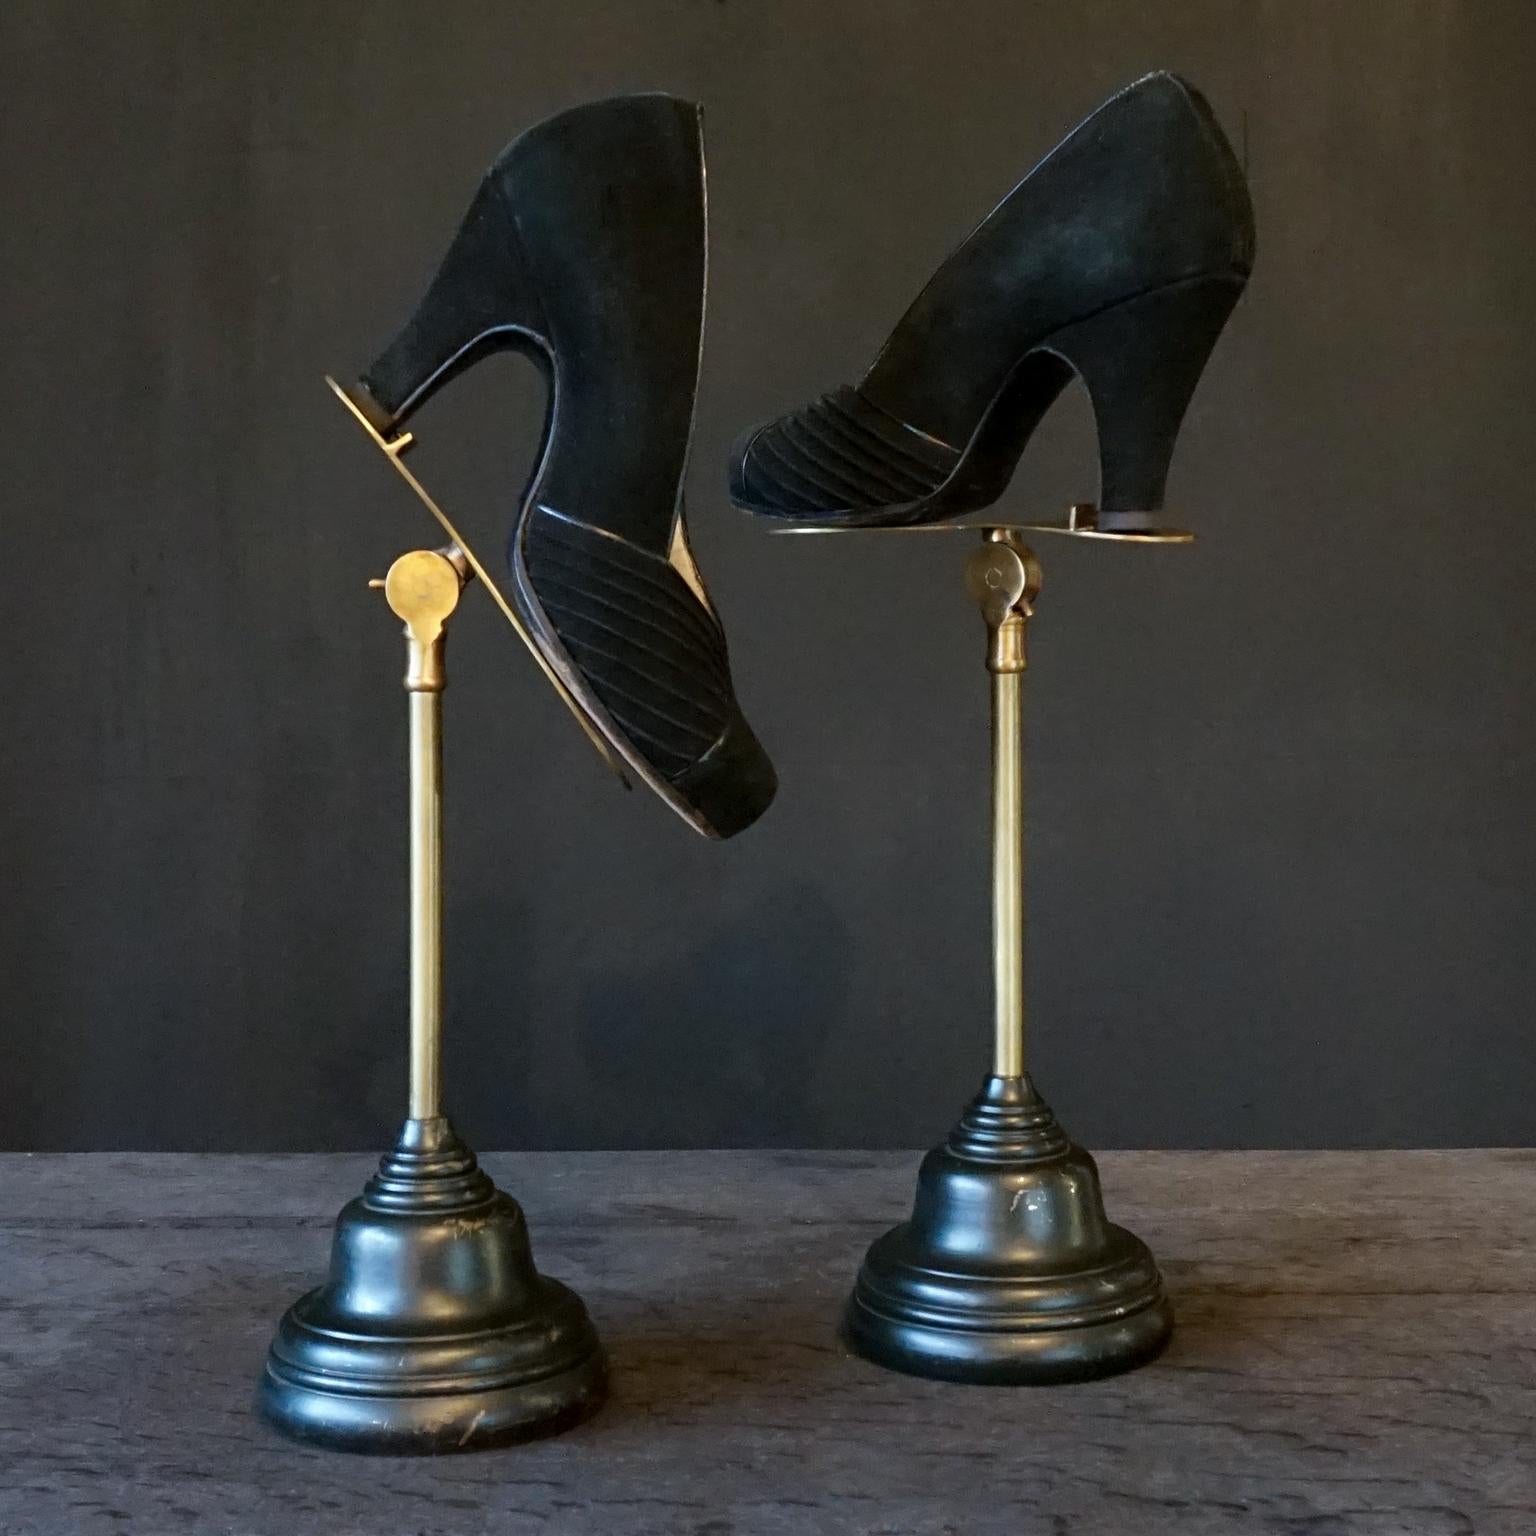 Very pretty set of department store counter display stands for shoes. 
It would be great to display your favourite pair on in your dressing room or walk-in closet.

The stands are adjustable in angle (the shoe shaped brass plateaus), but not in